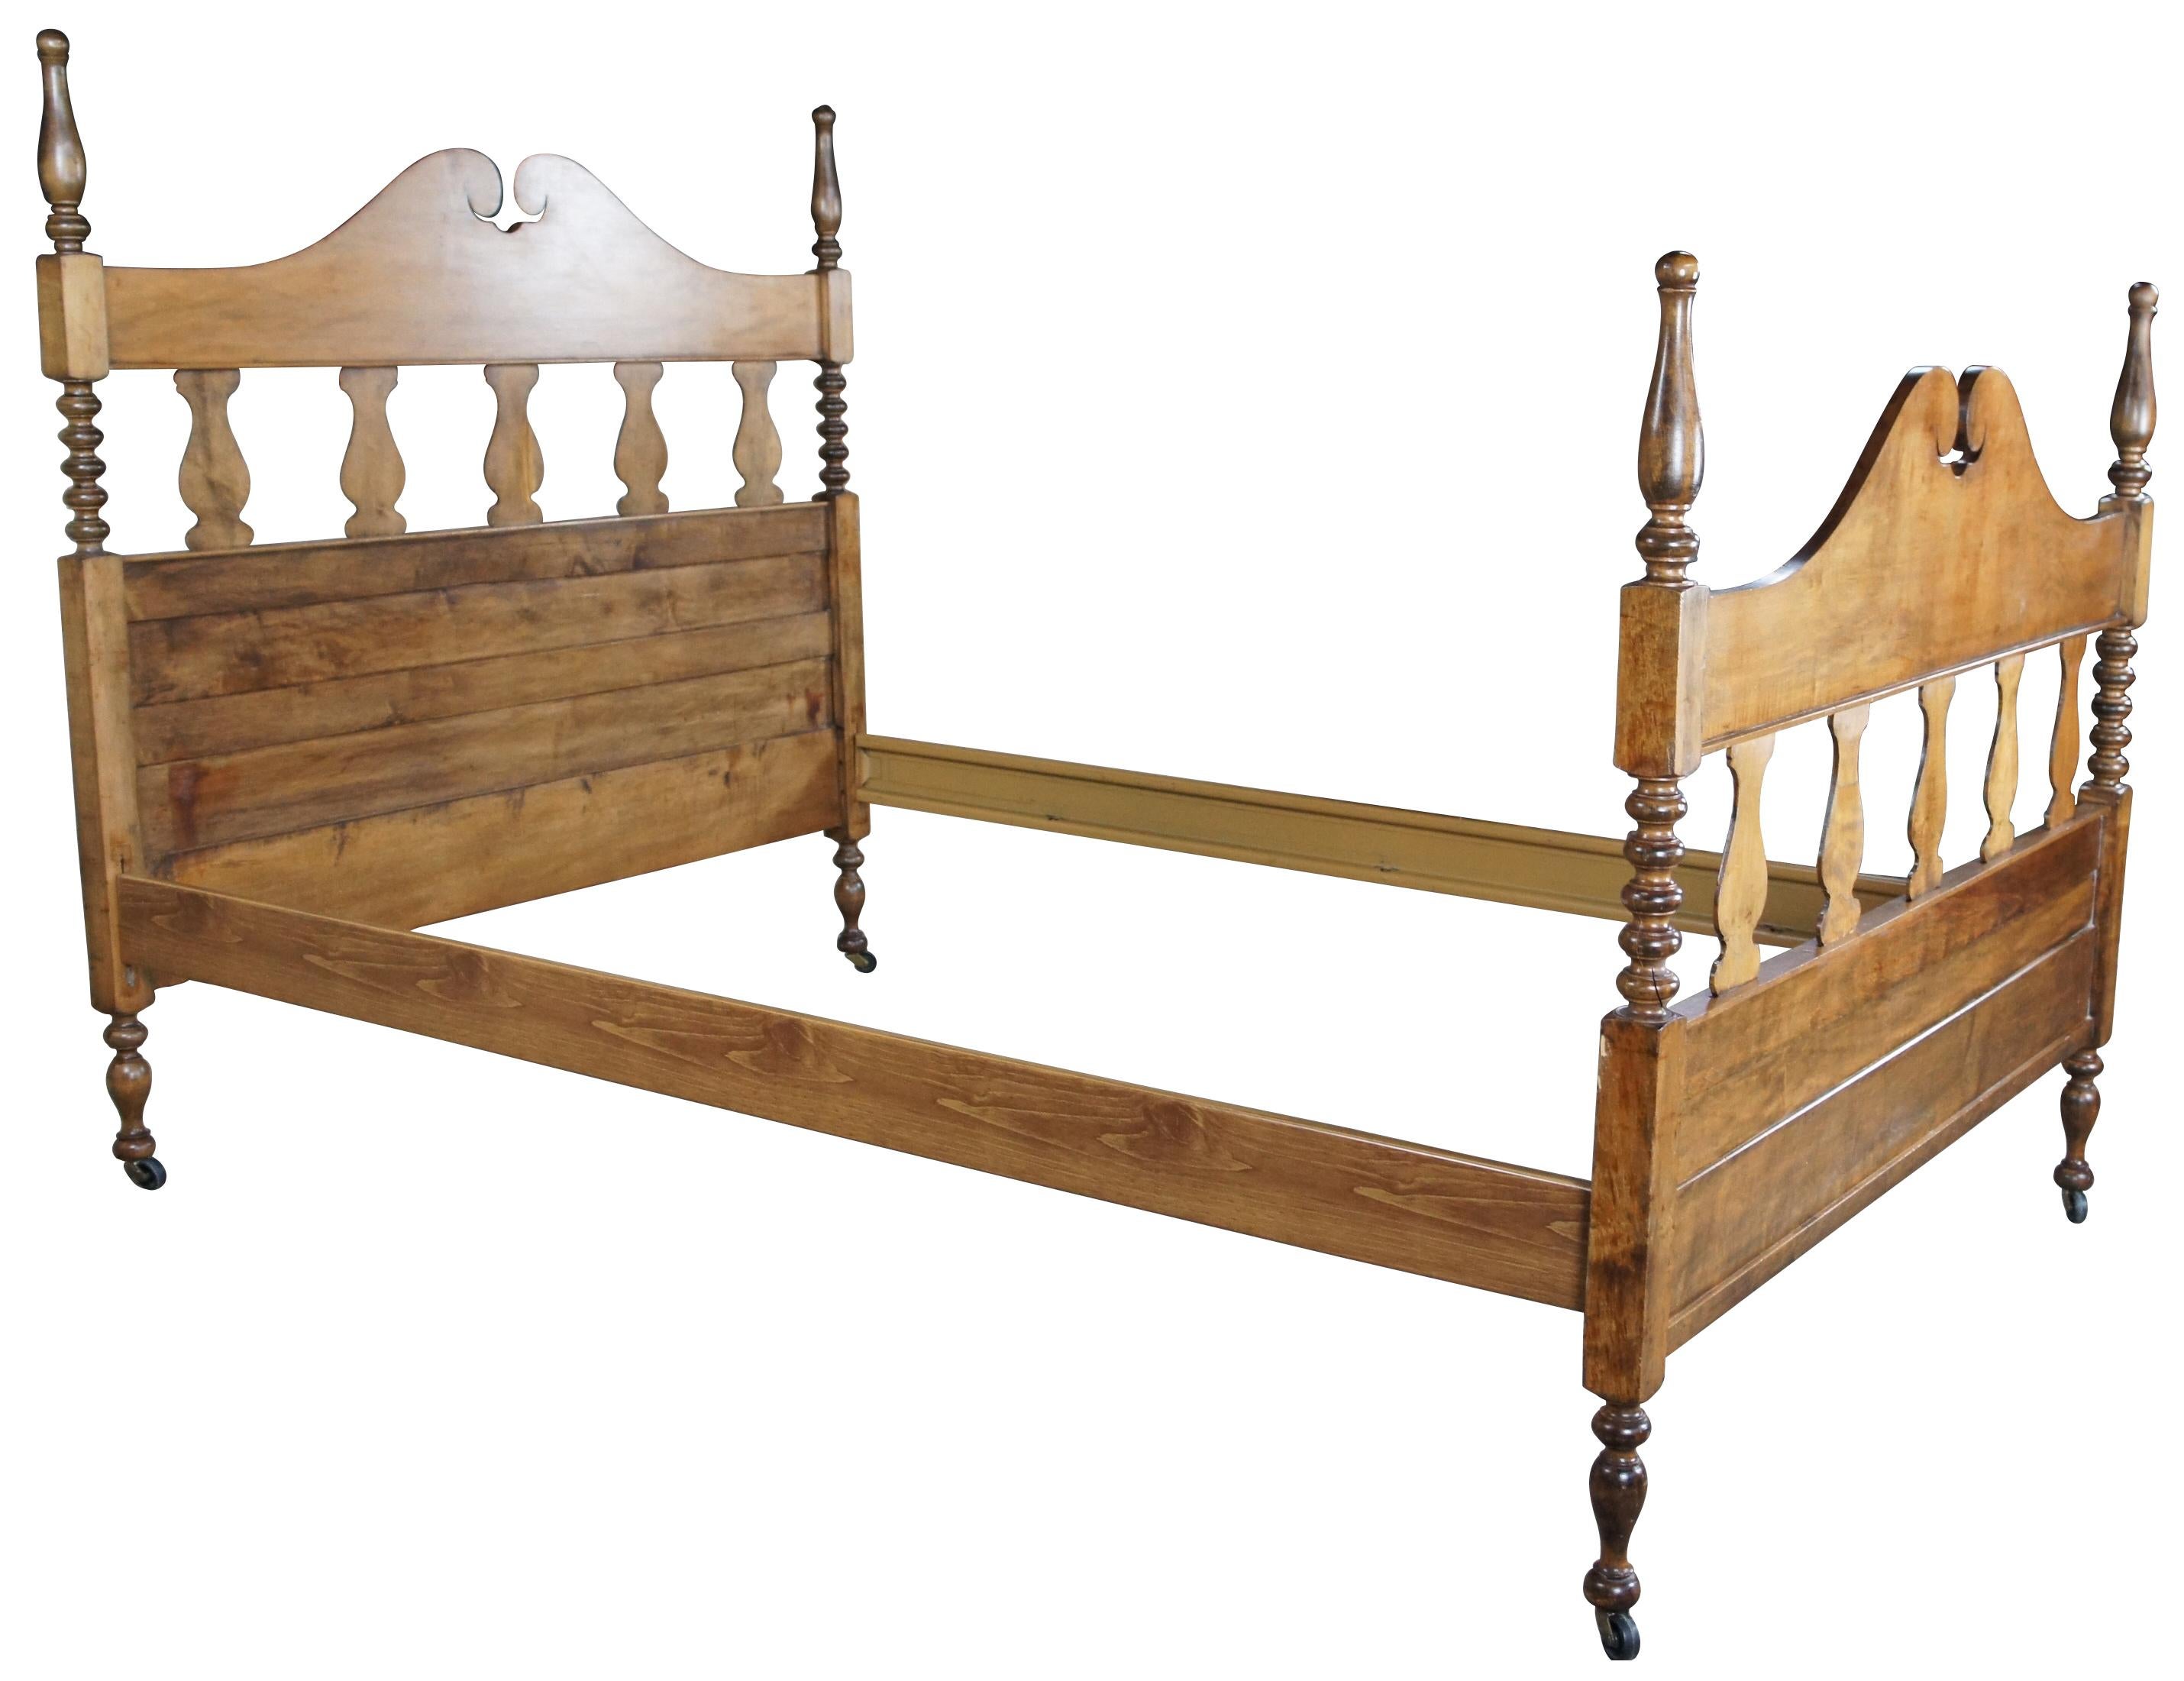 Late Victorian Crescent Line full size bed. Made of oak featuring an open pediment, four posts, ribbed supports and vase shaped splats. Circa 1900s

Measures: 57.5